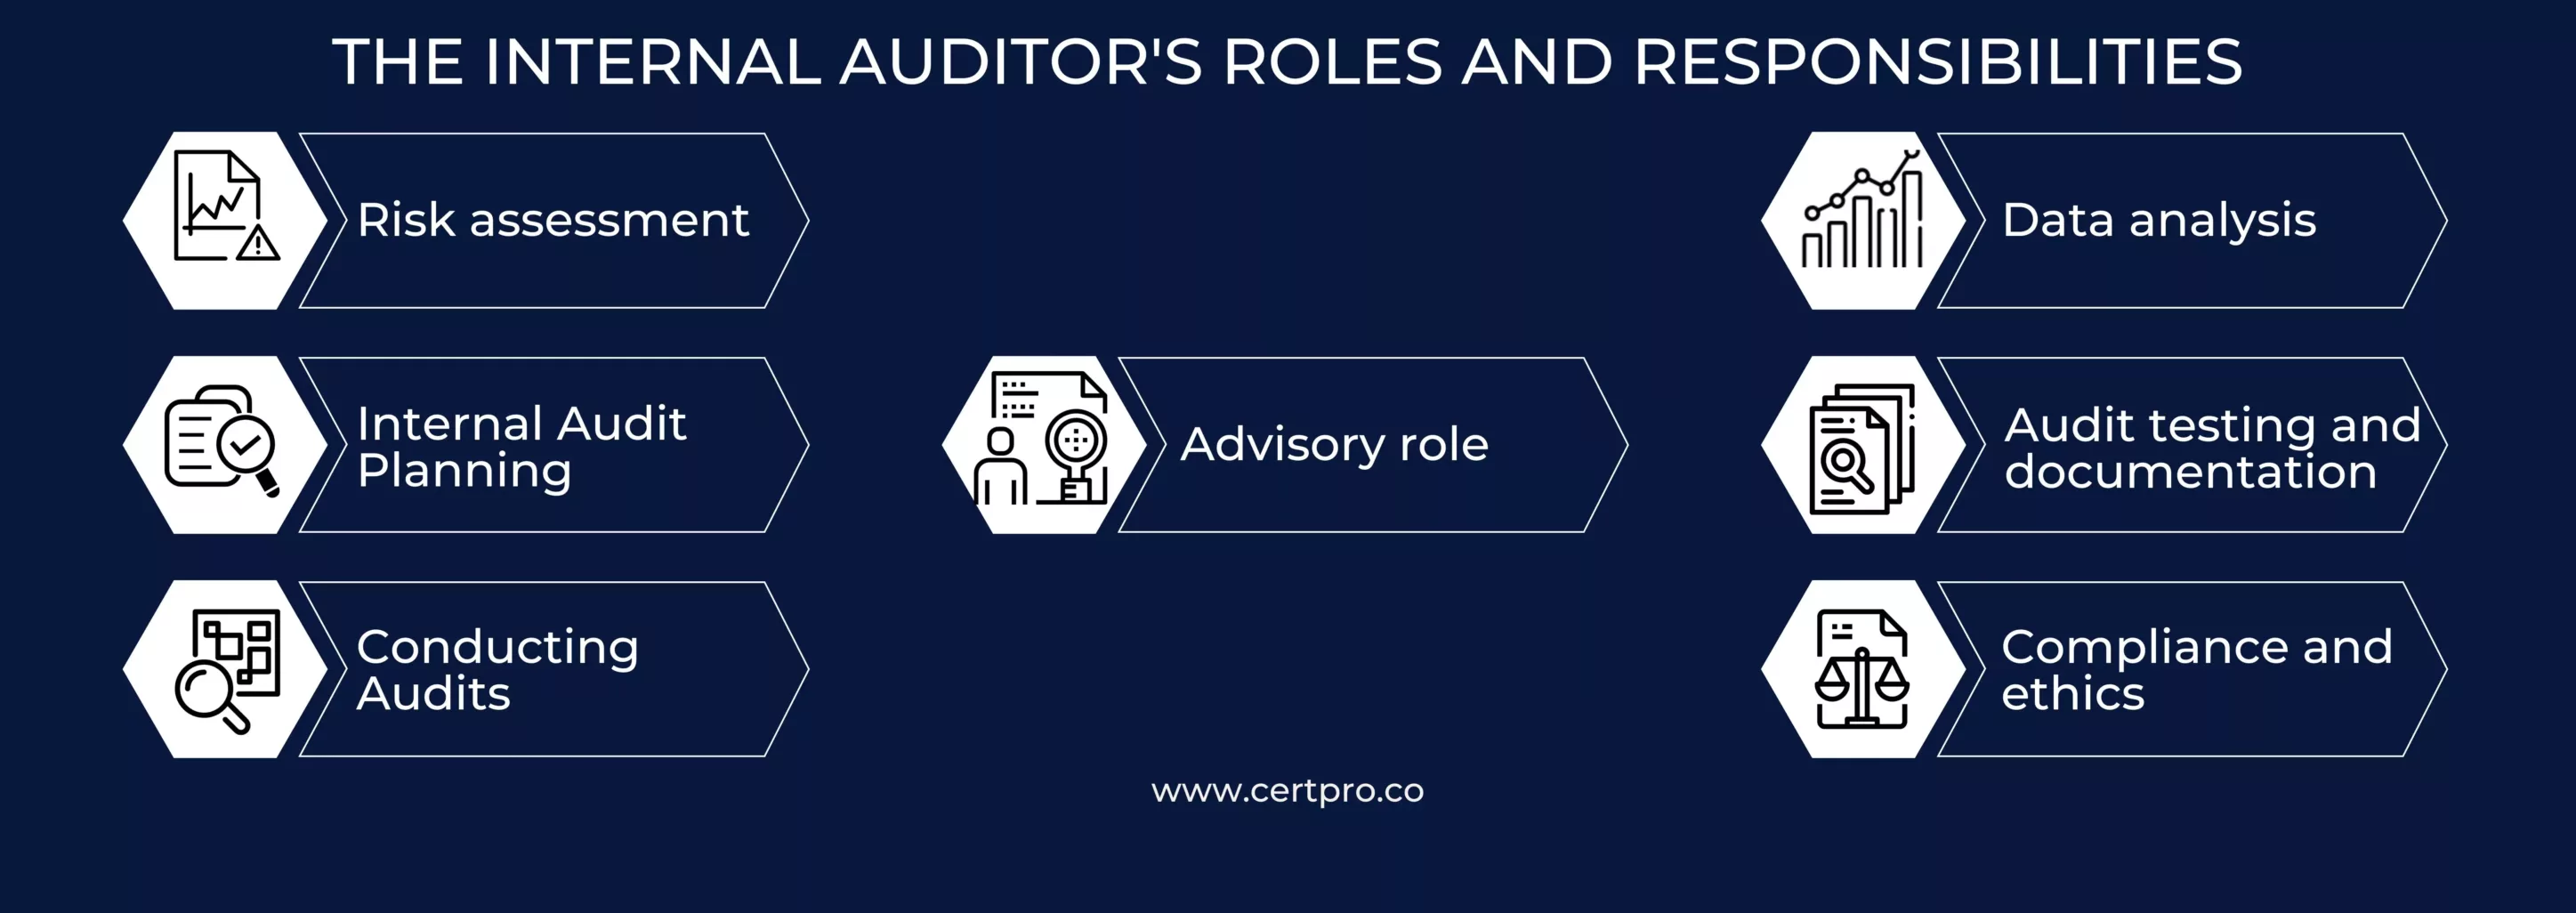 INTERNAL AUDITOR'S ROLES AND RESPONSIBILITIES